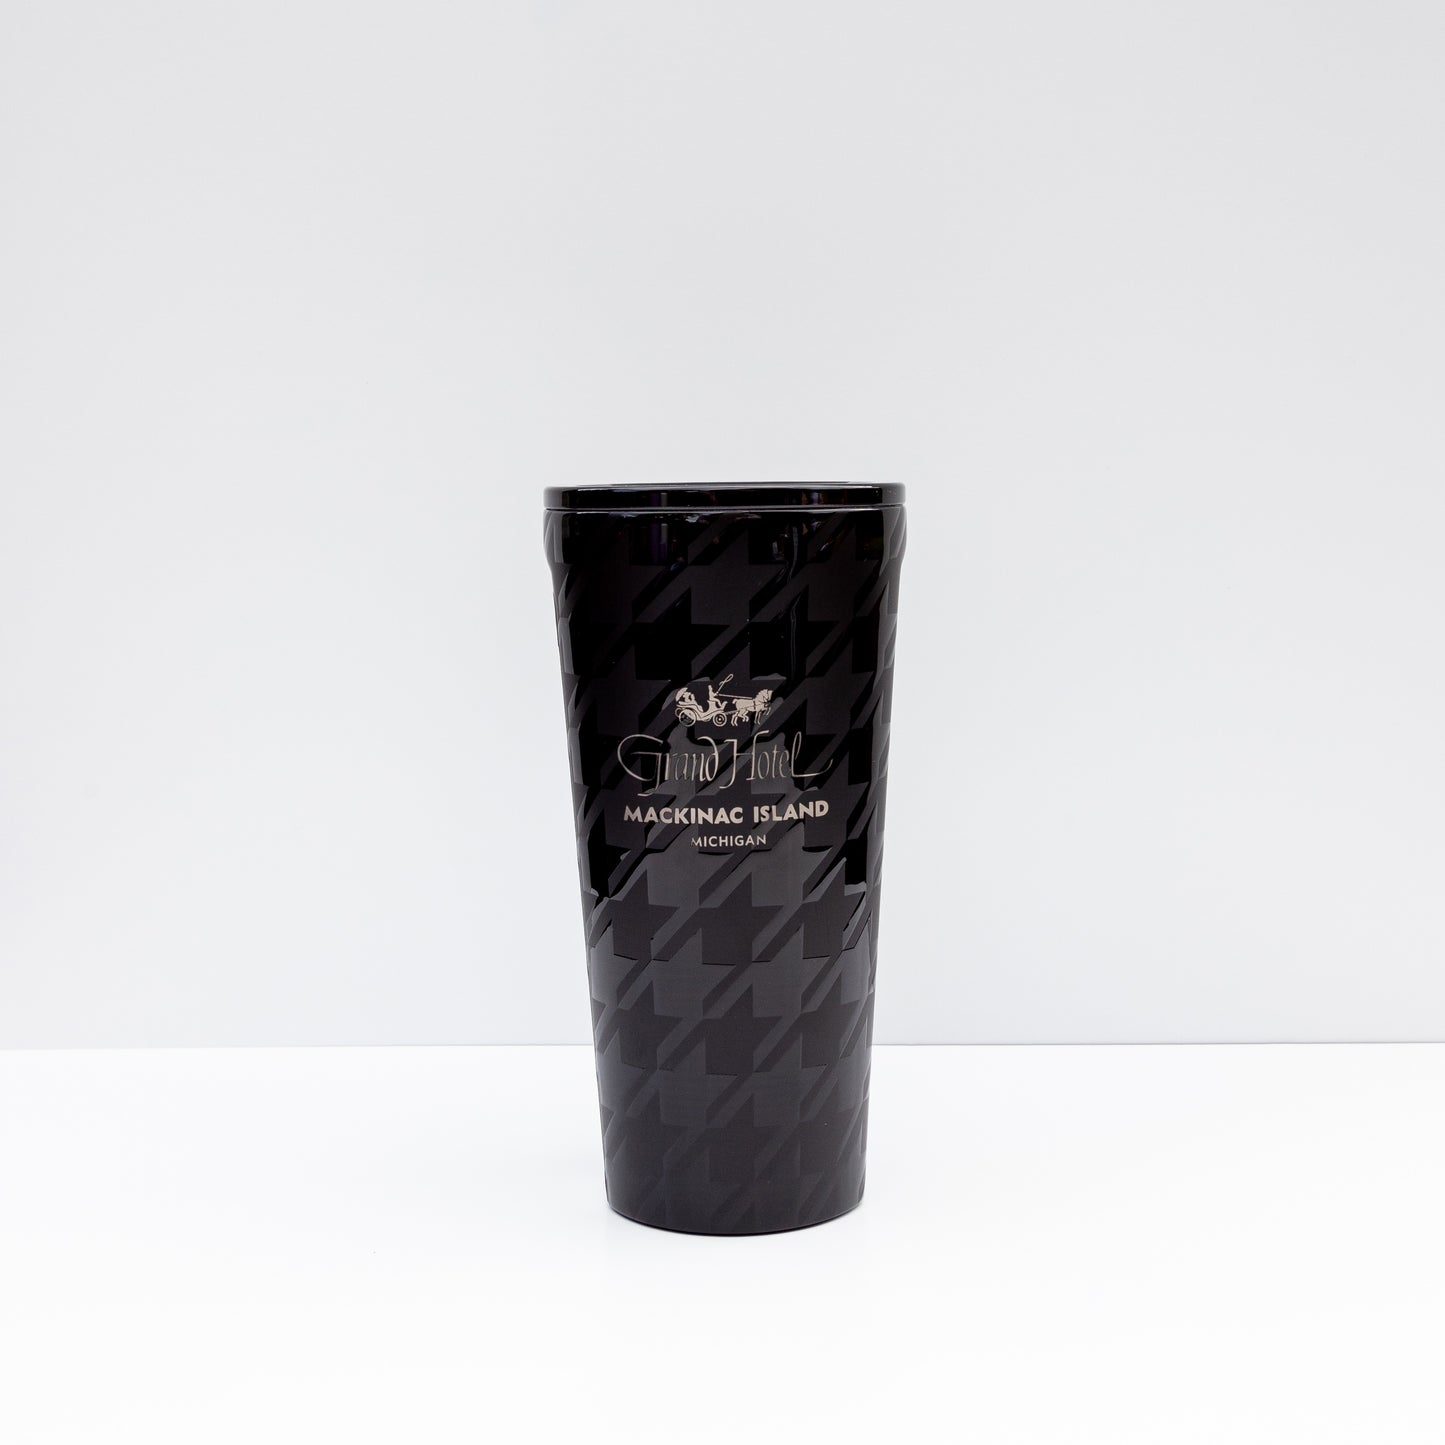 Corkcicle Grand Hotel Onyx Houndstooth Tumbler